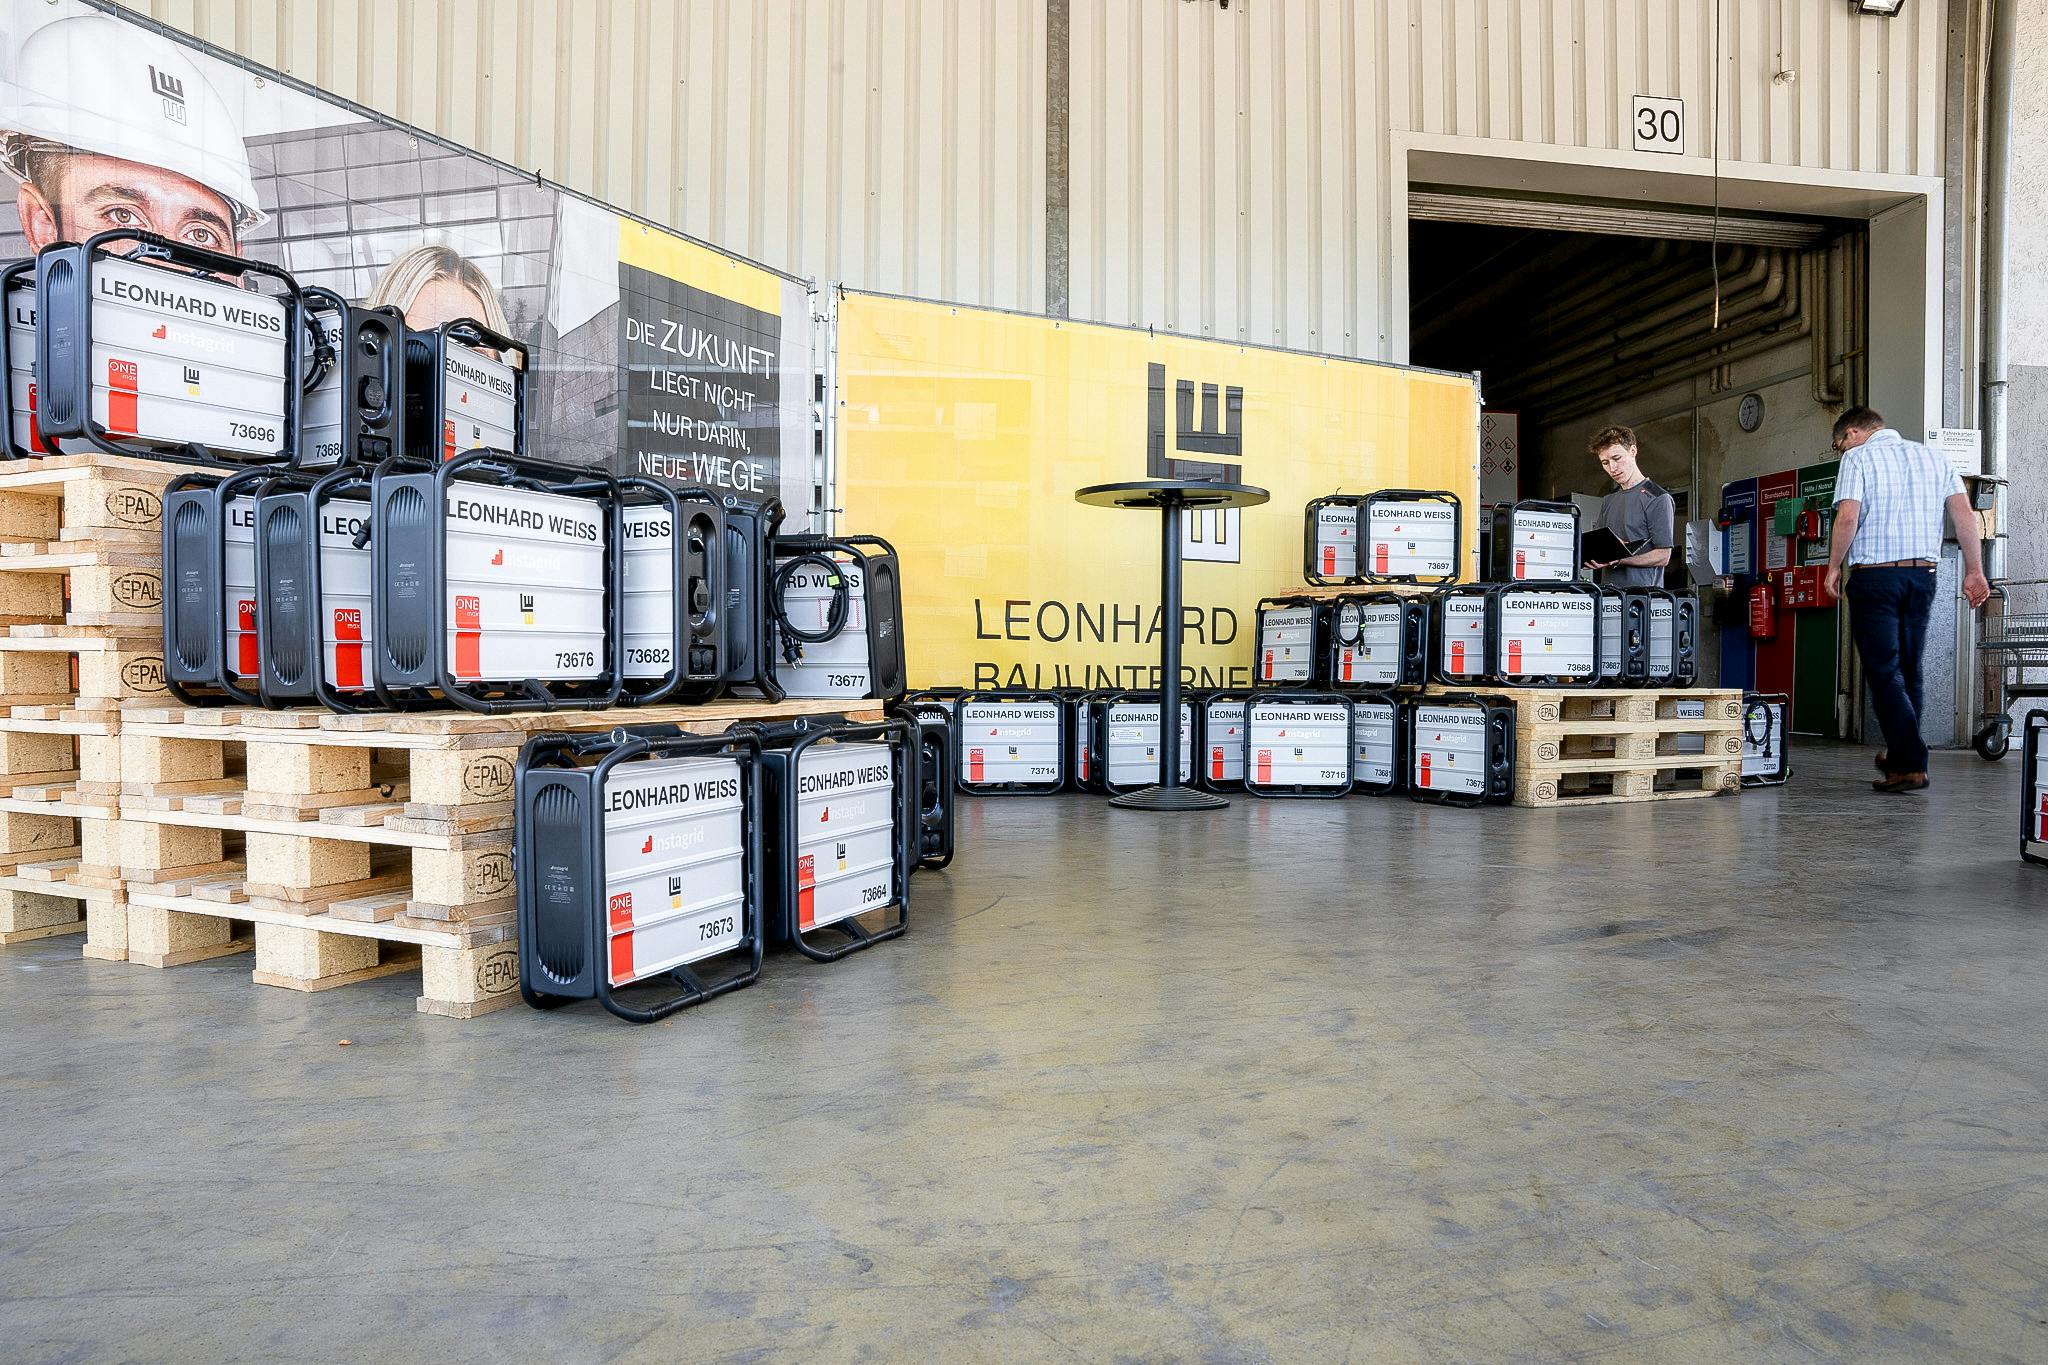 LEONHARD WEISS partnership with Instagrid, devices displayed on wooden pallets